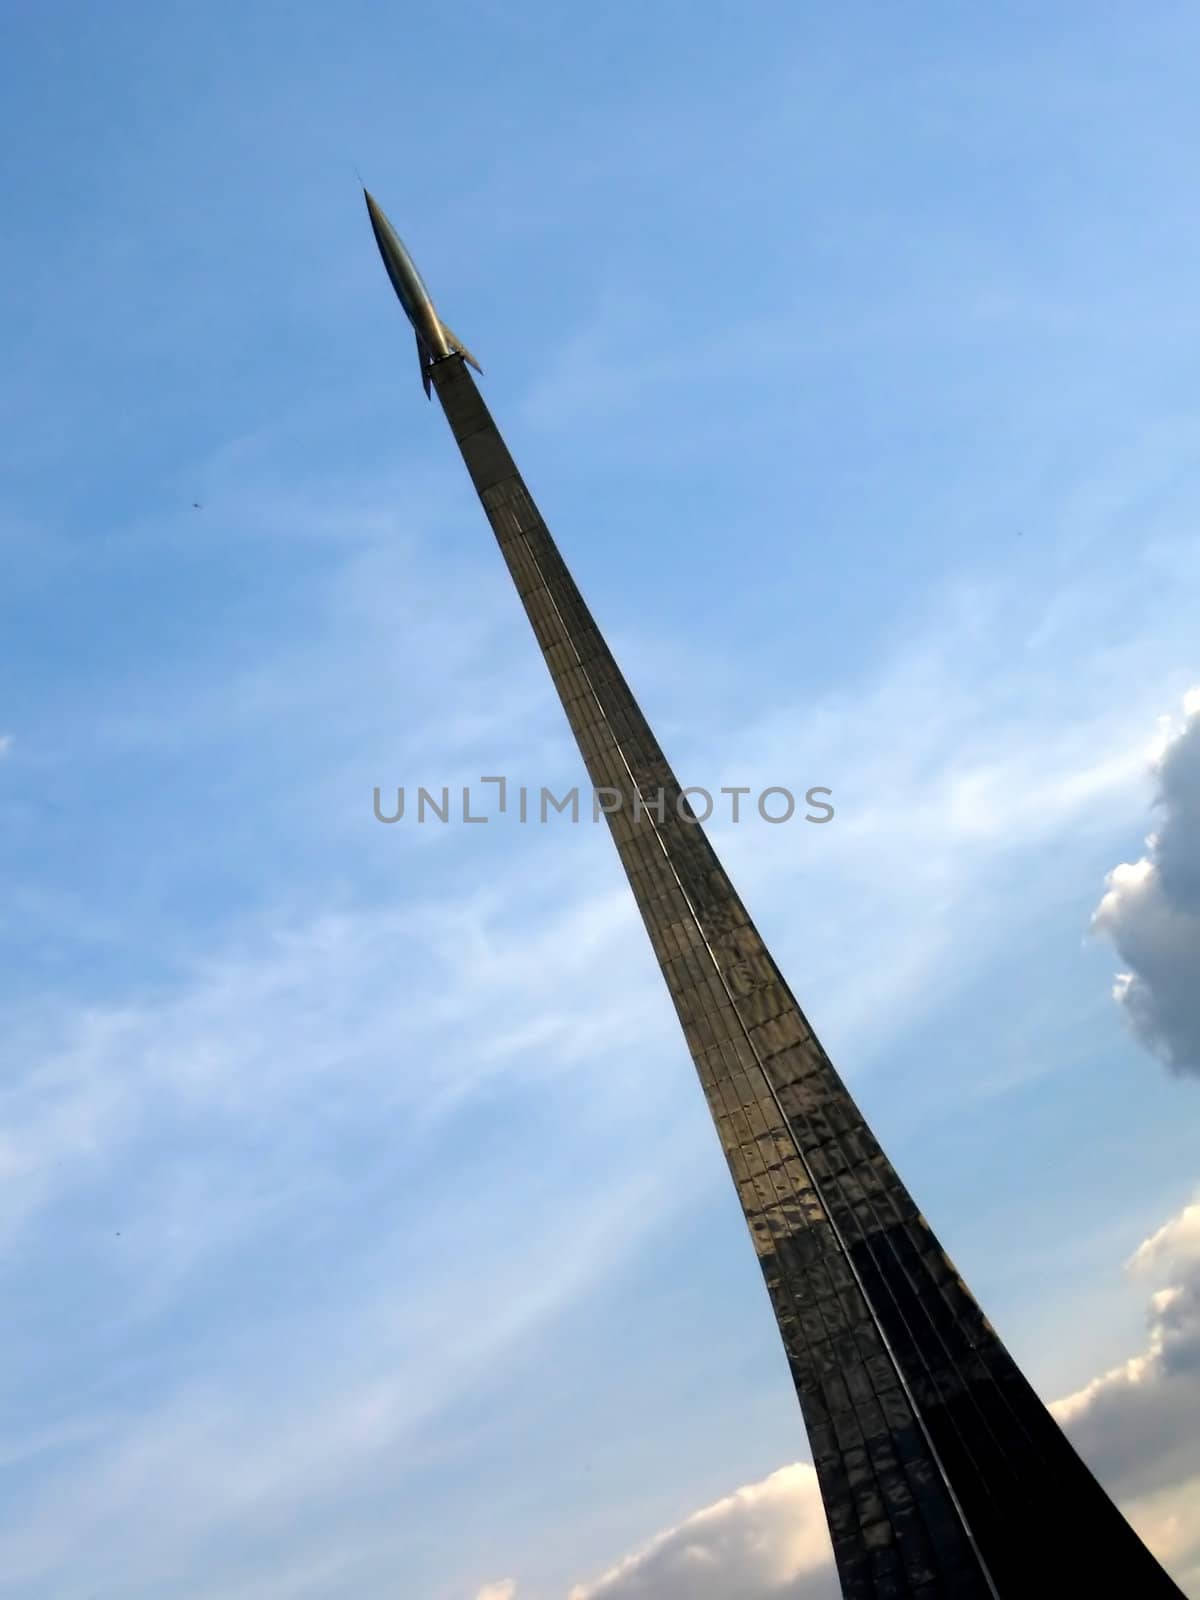 Rocket monument by tomatto